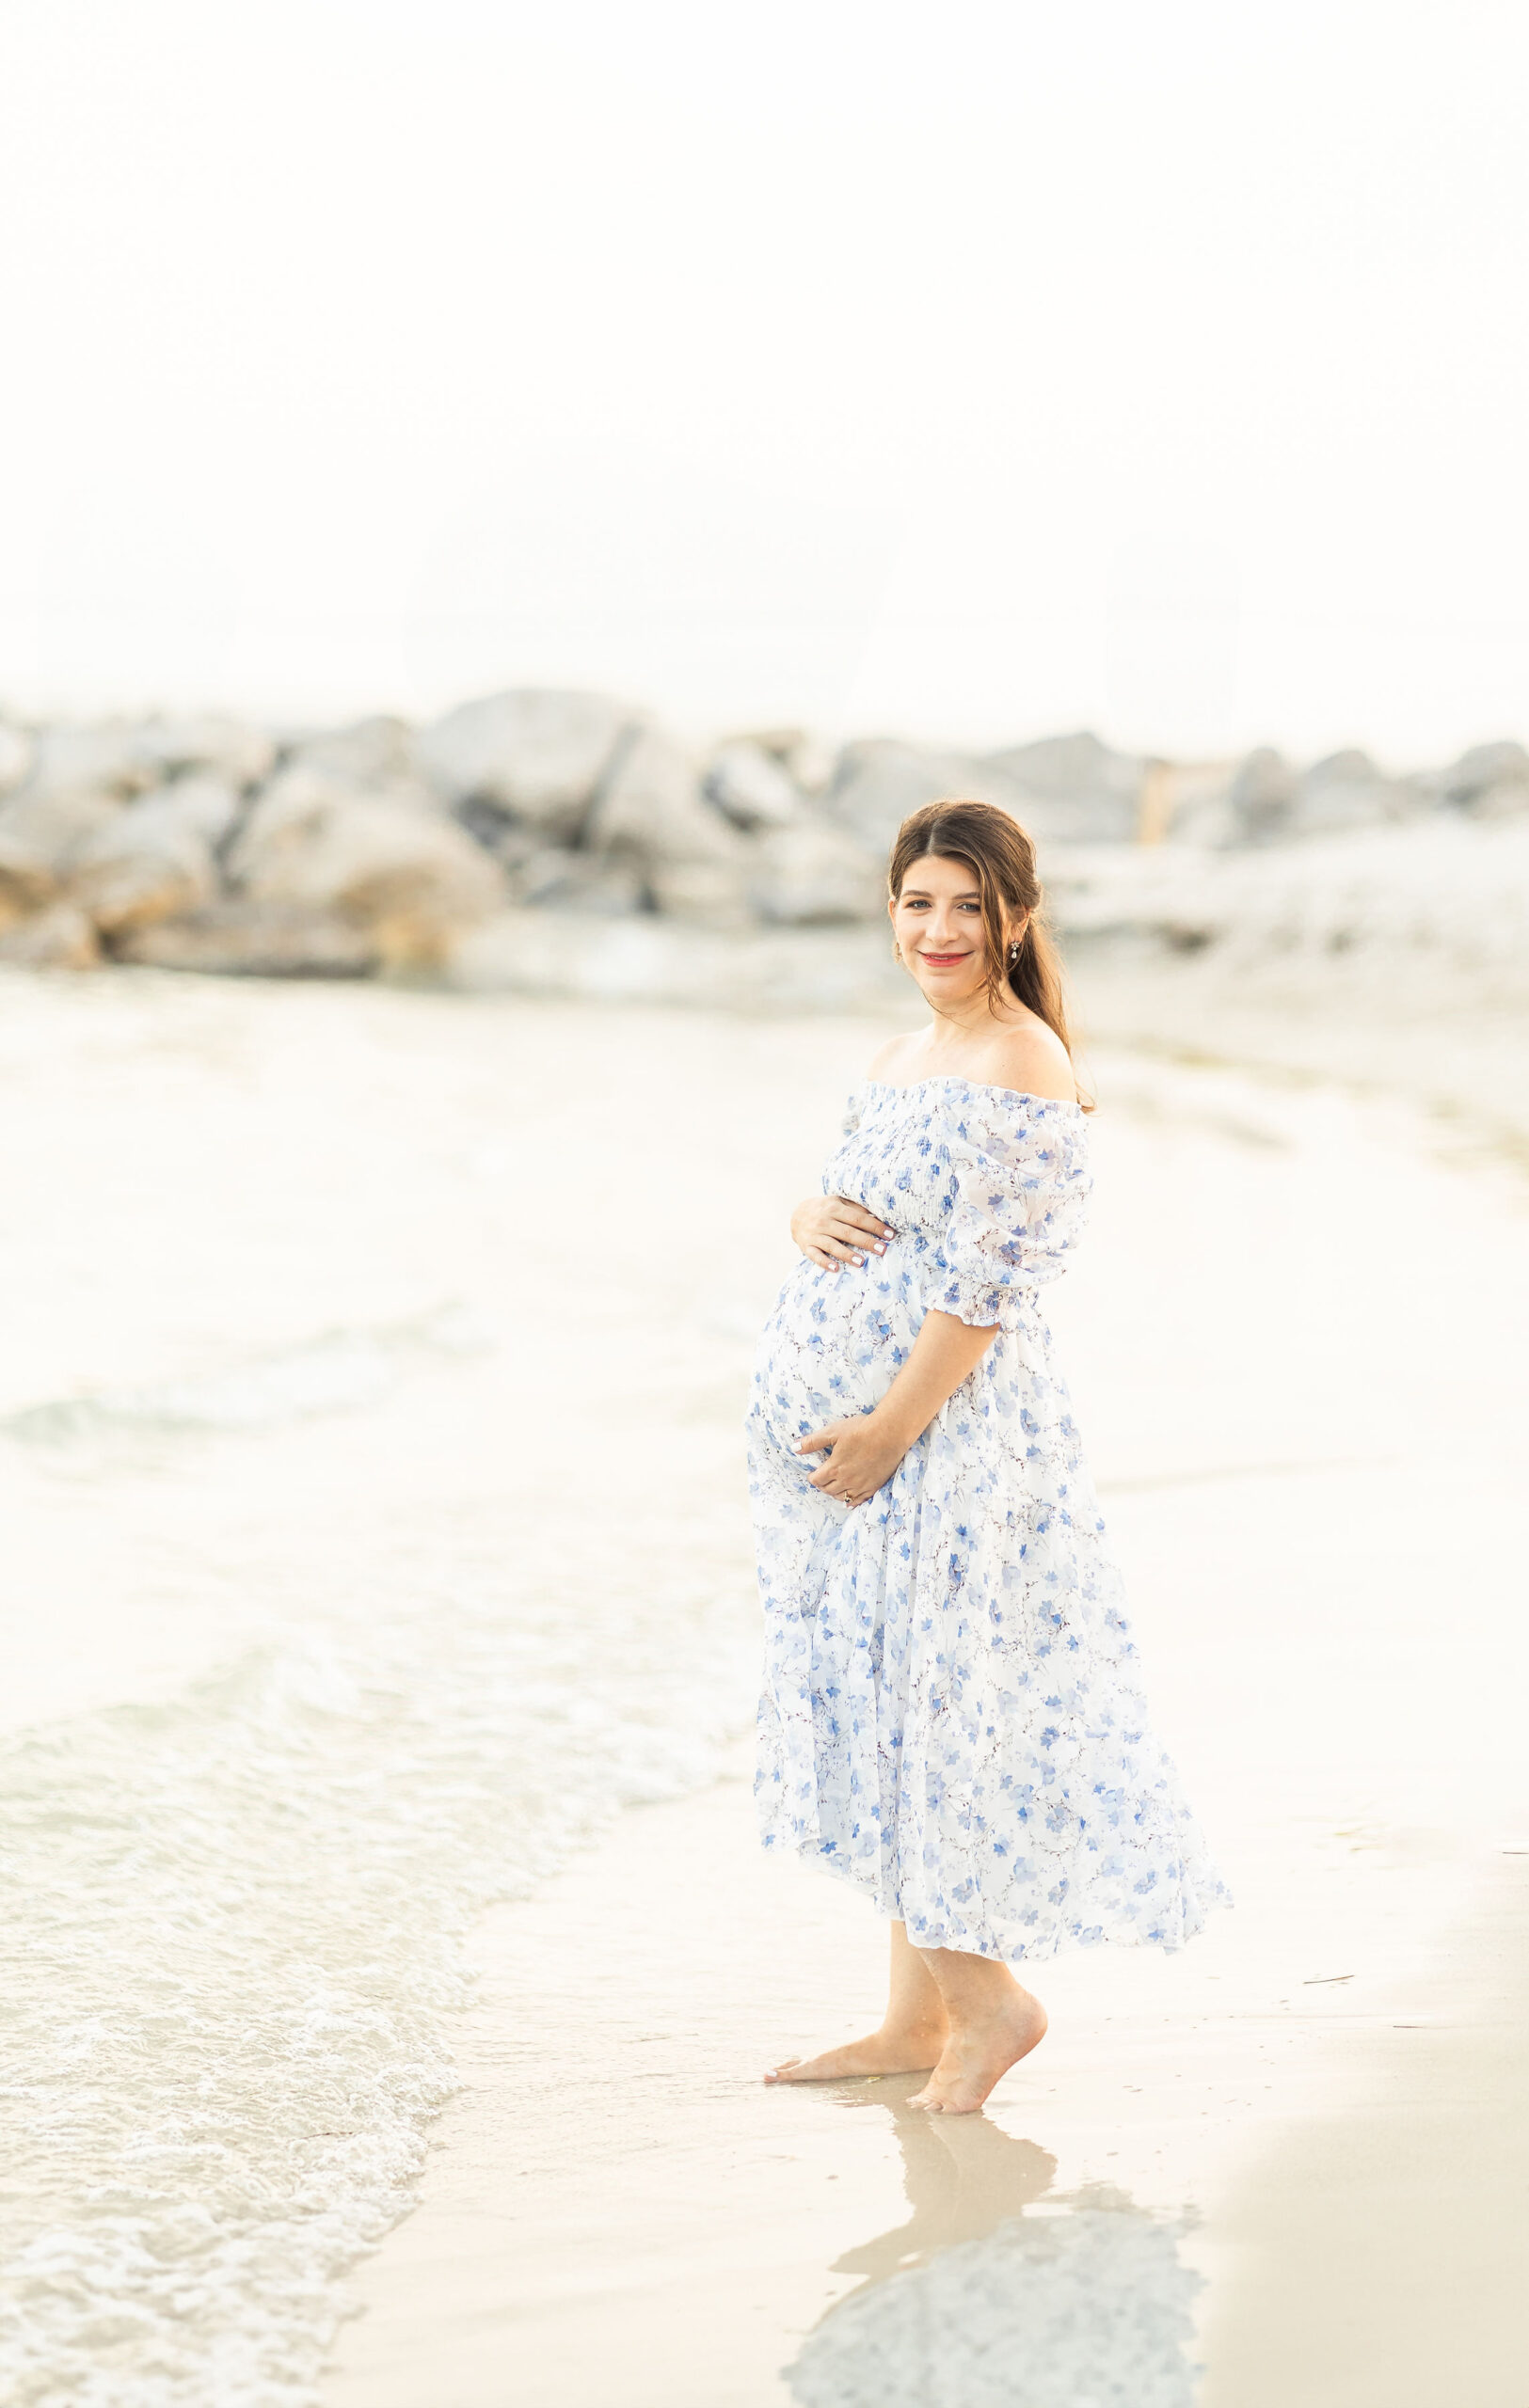 A mom to be stands on a beach barefoot in a blue flower dress with hands on her bump